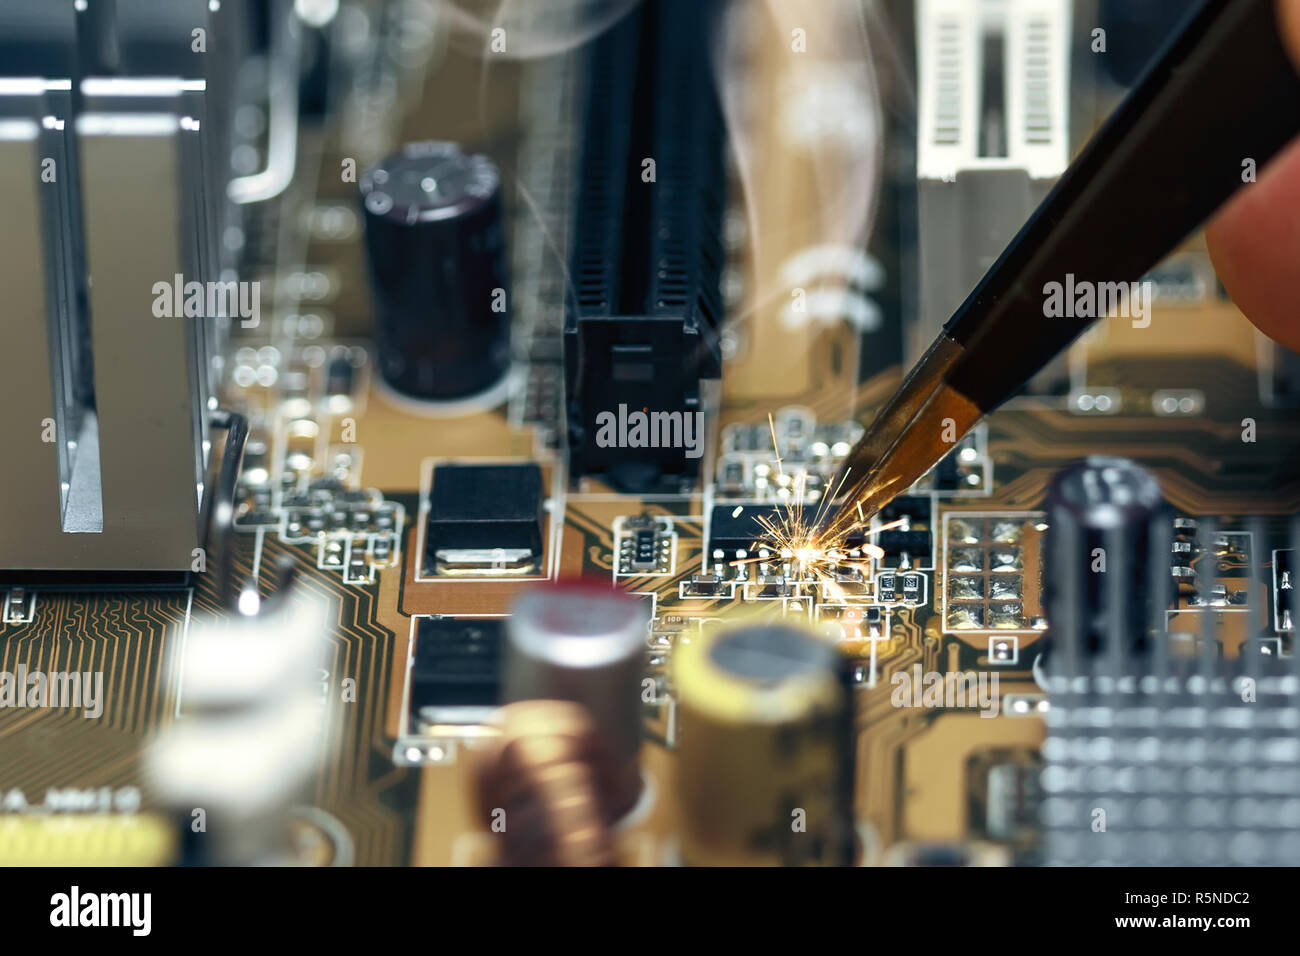 Short circuit on the motherboard during repair Stock Photo - Alamy